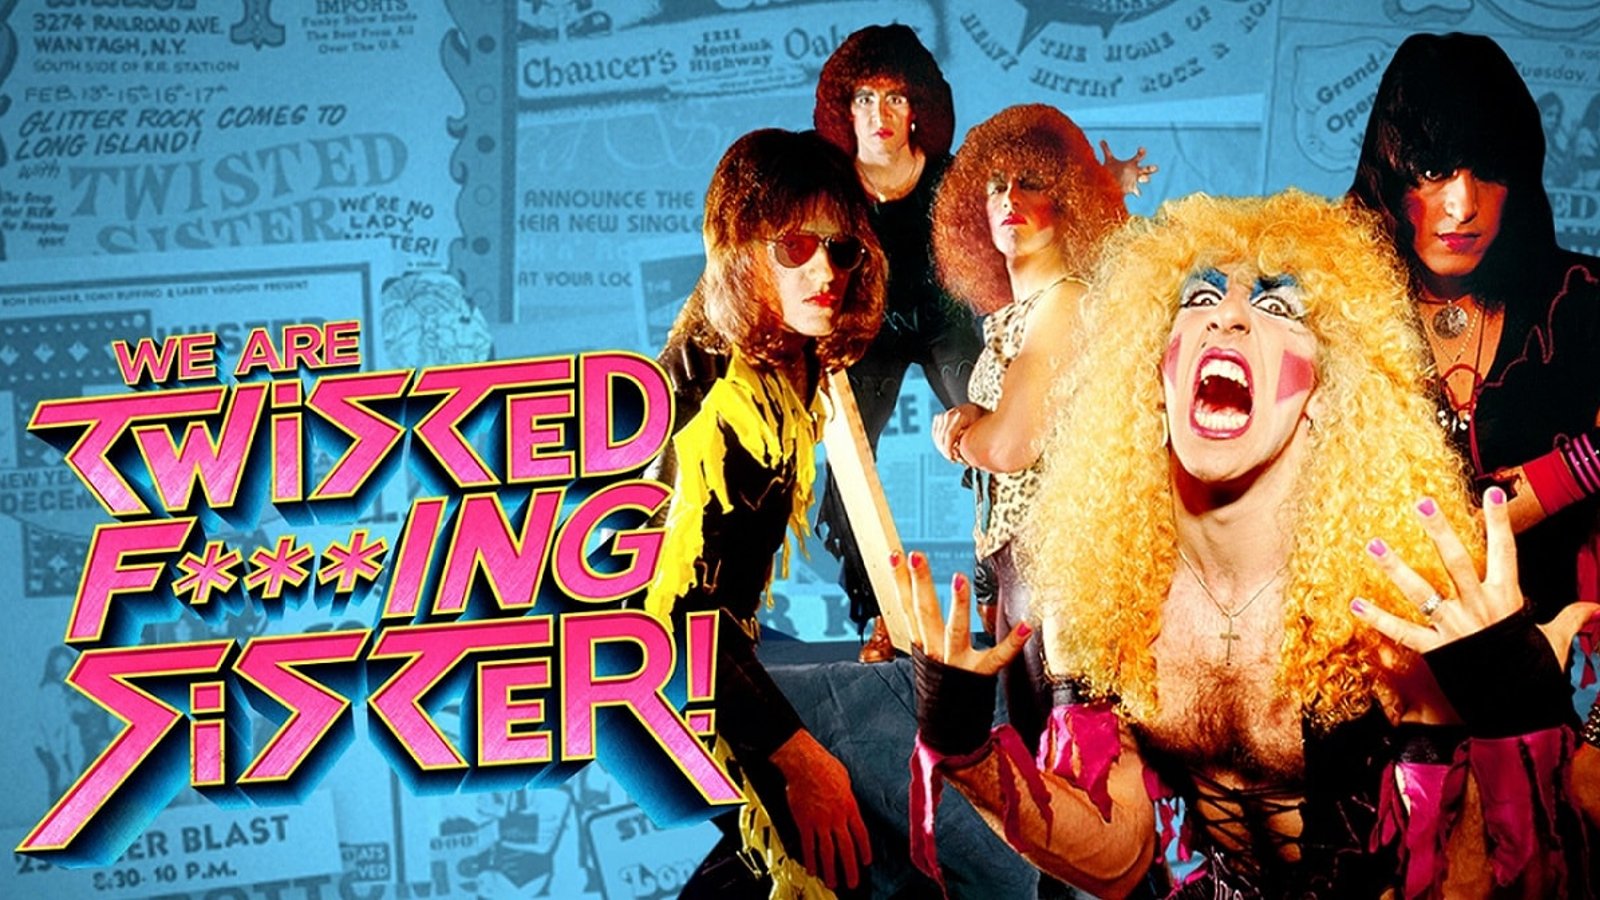 We Are Twisted F***ing Sister - The Origin Story of the Glam Rock Band